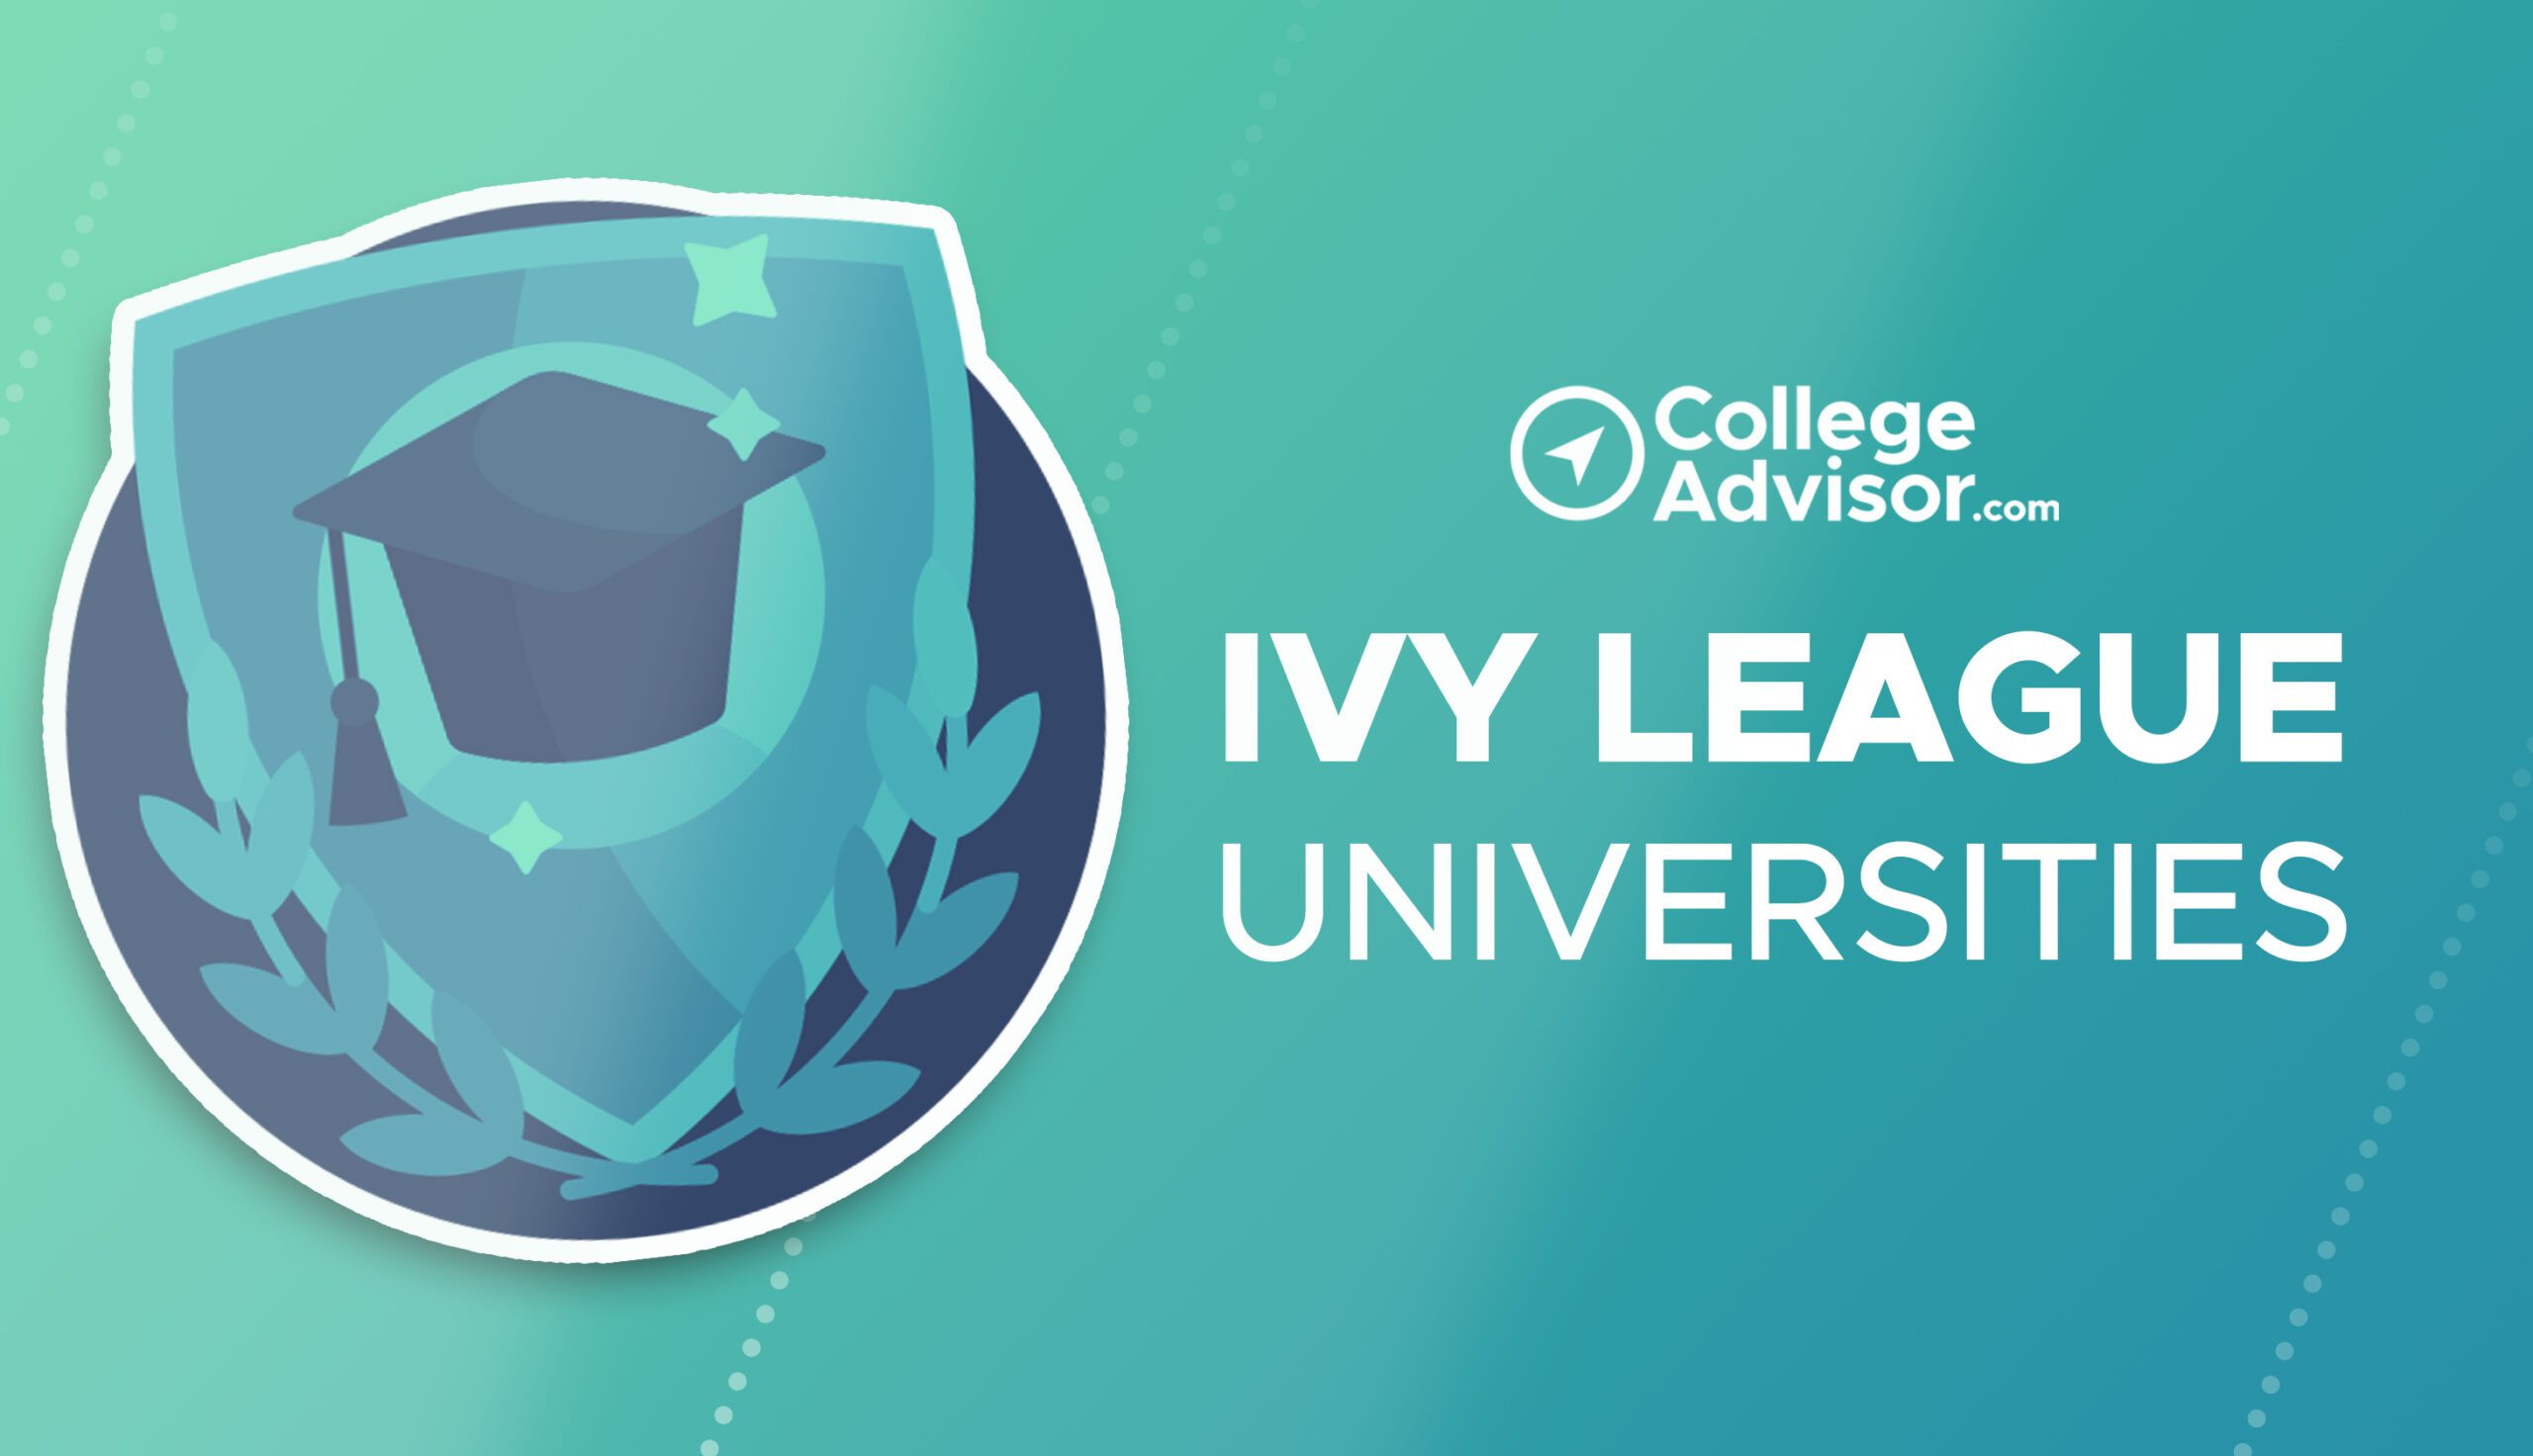 Ivy League Schools vs. Public Ivies: Guide to Comparing and